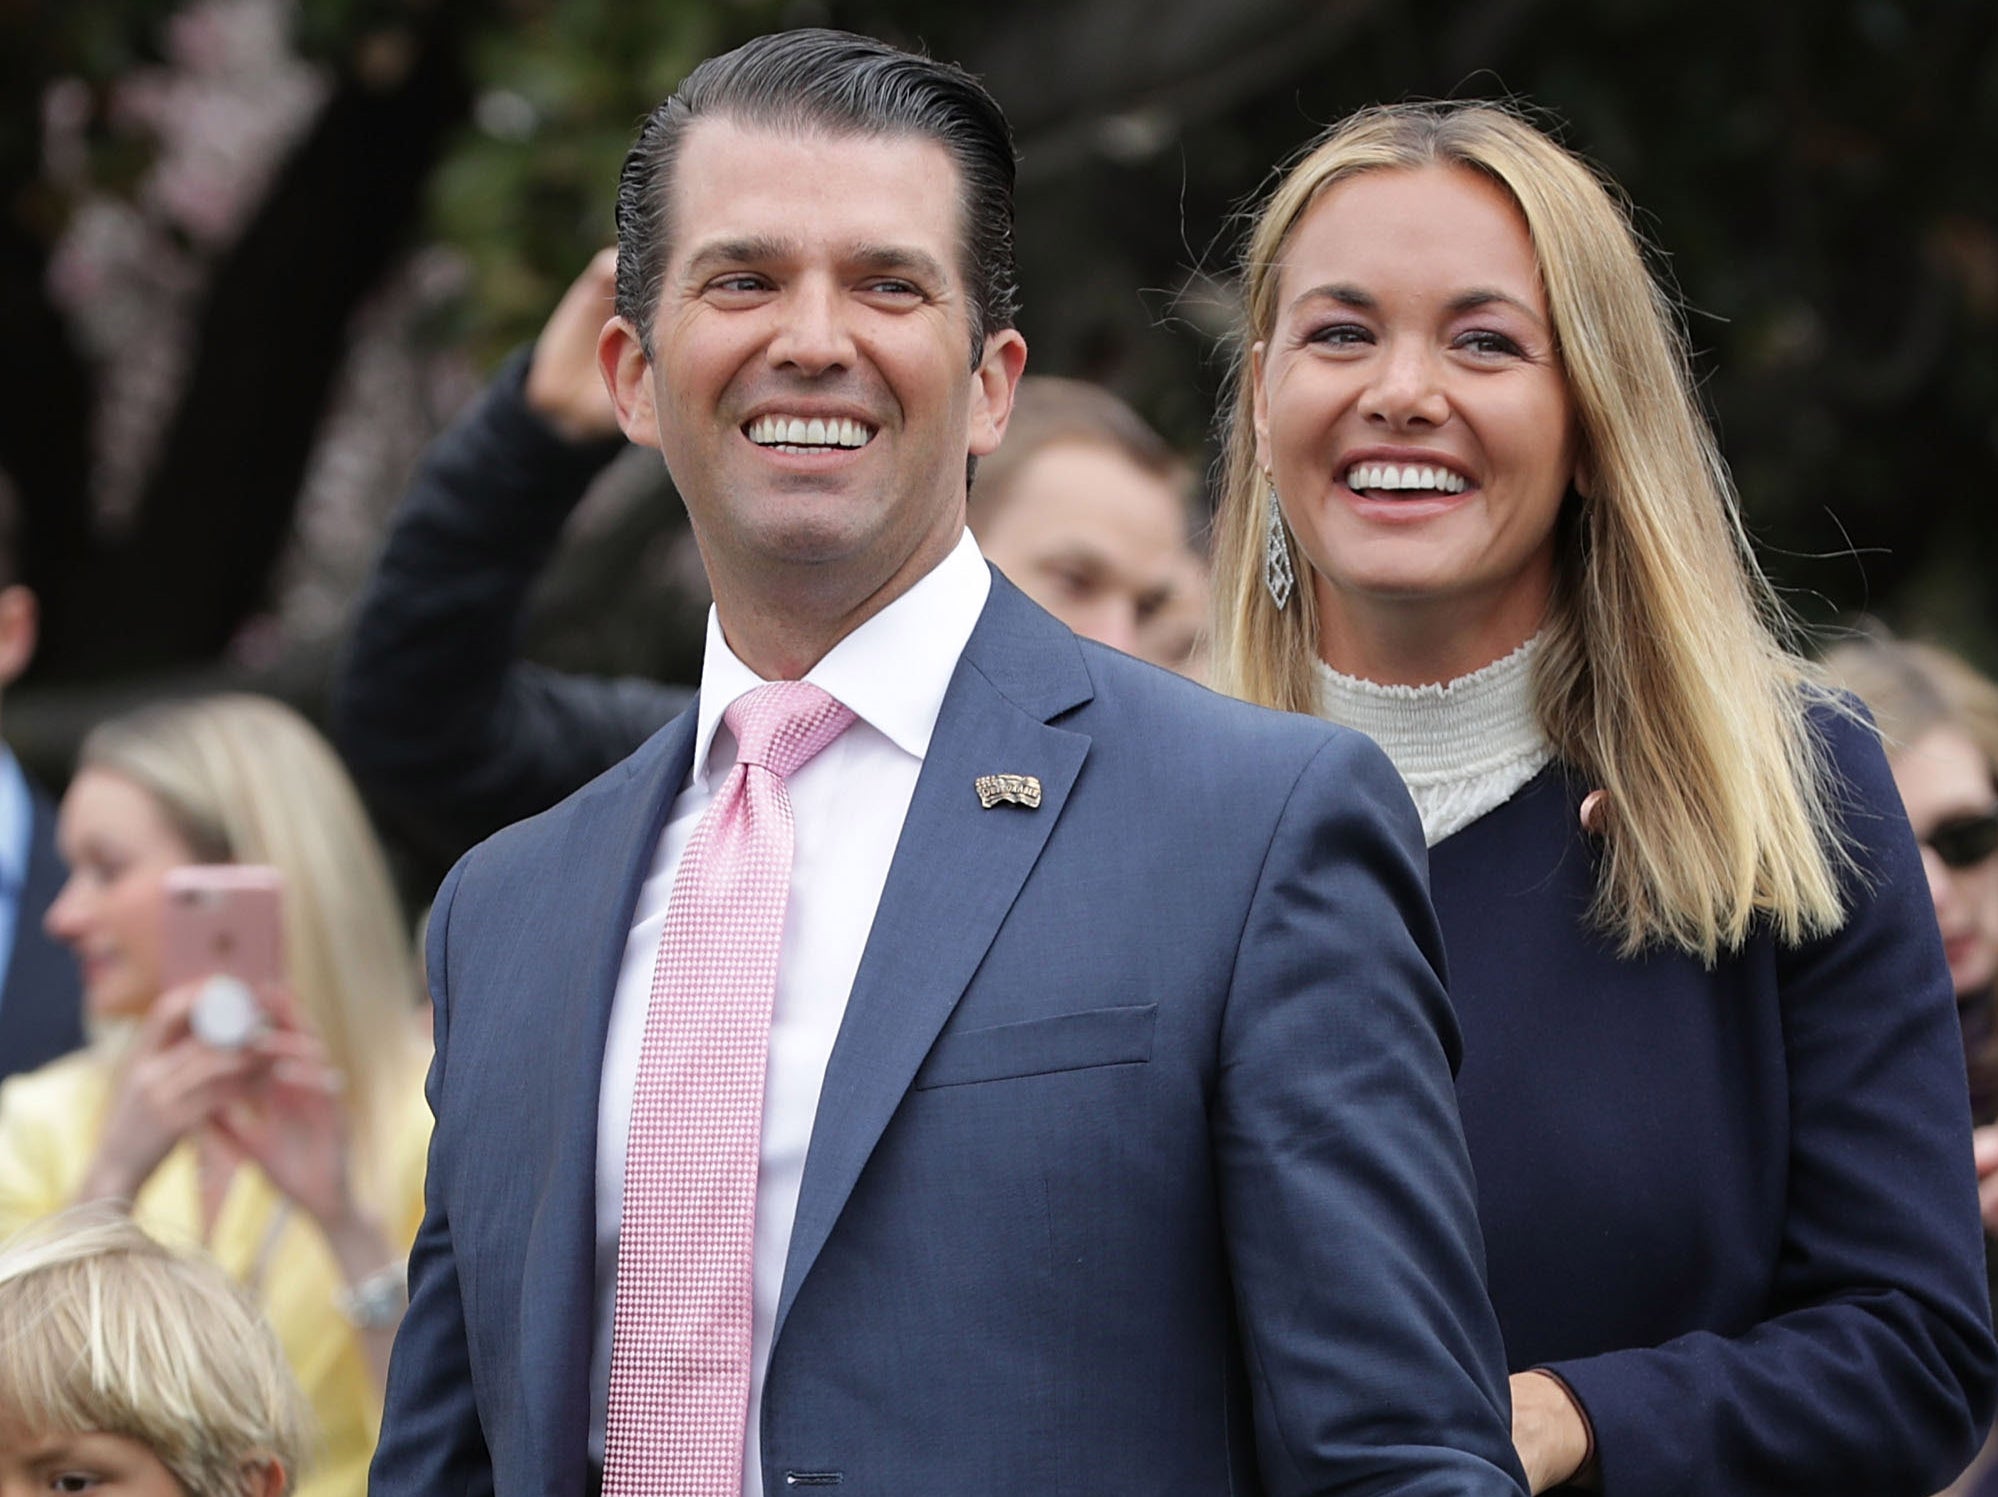 Donald Trump Jr. (L) and his ex-wife Vanessa Trump attend the 140th annual Easter Egg Roll with their five children on the South Lawn of the White House April 2, 2018 in Washington, DC.